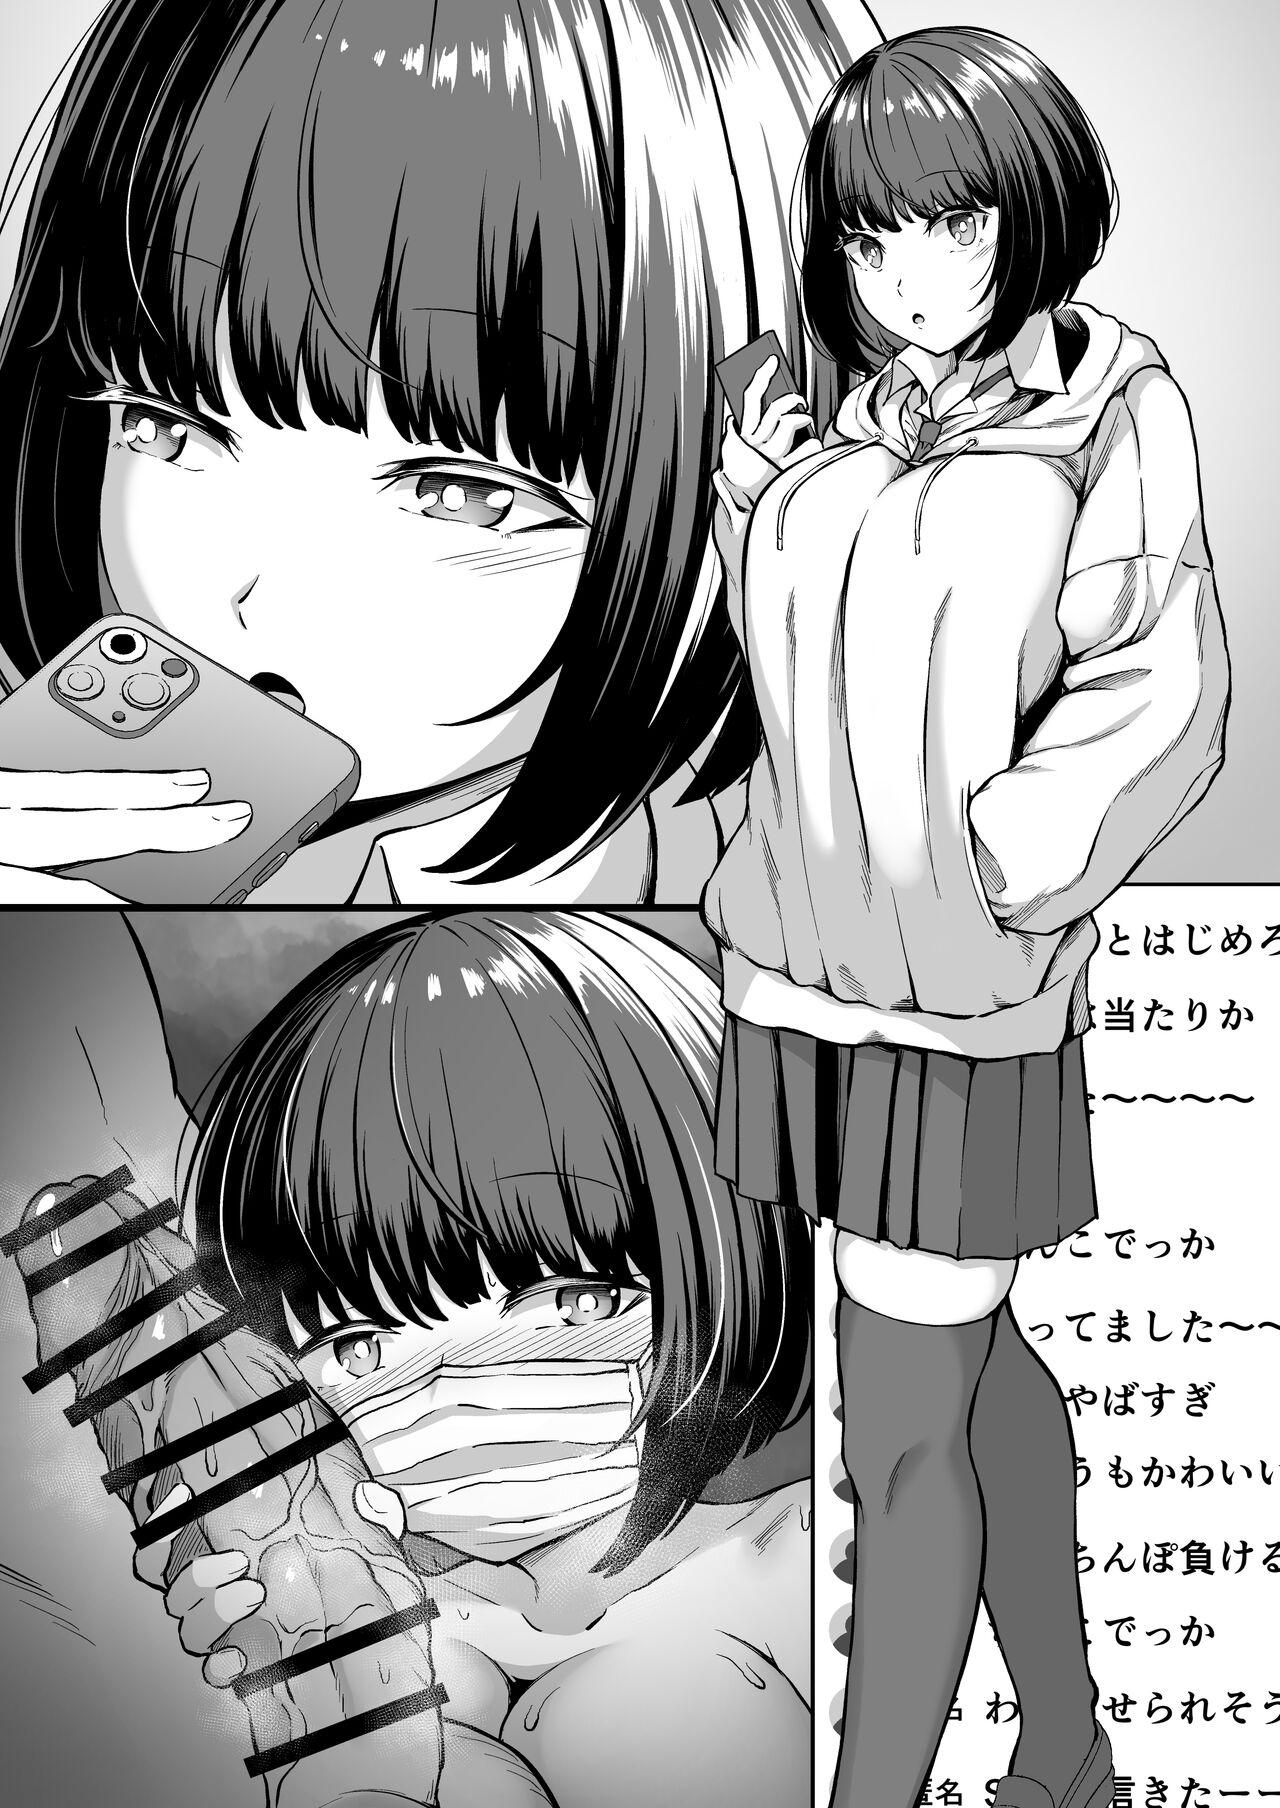 Oral Sex 好きだった女の子に告白してみた Party - Page 3